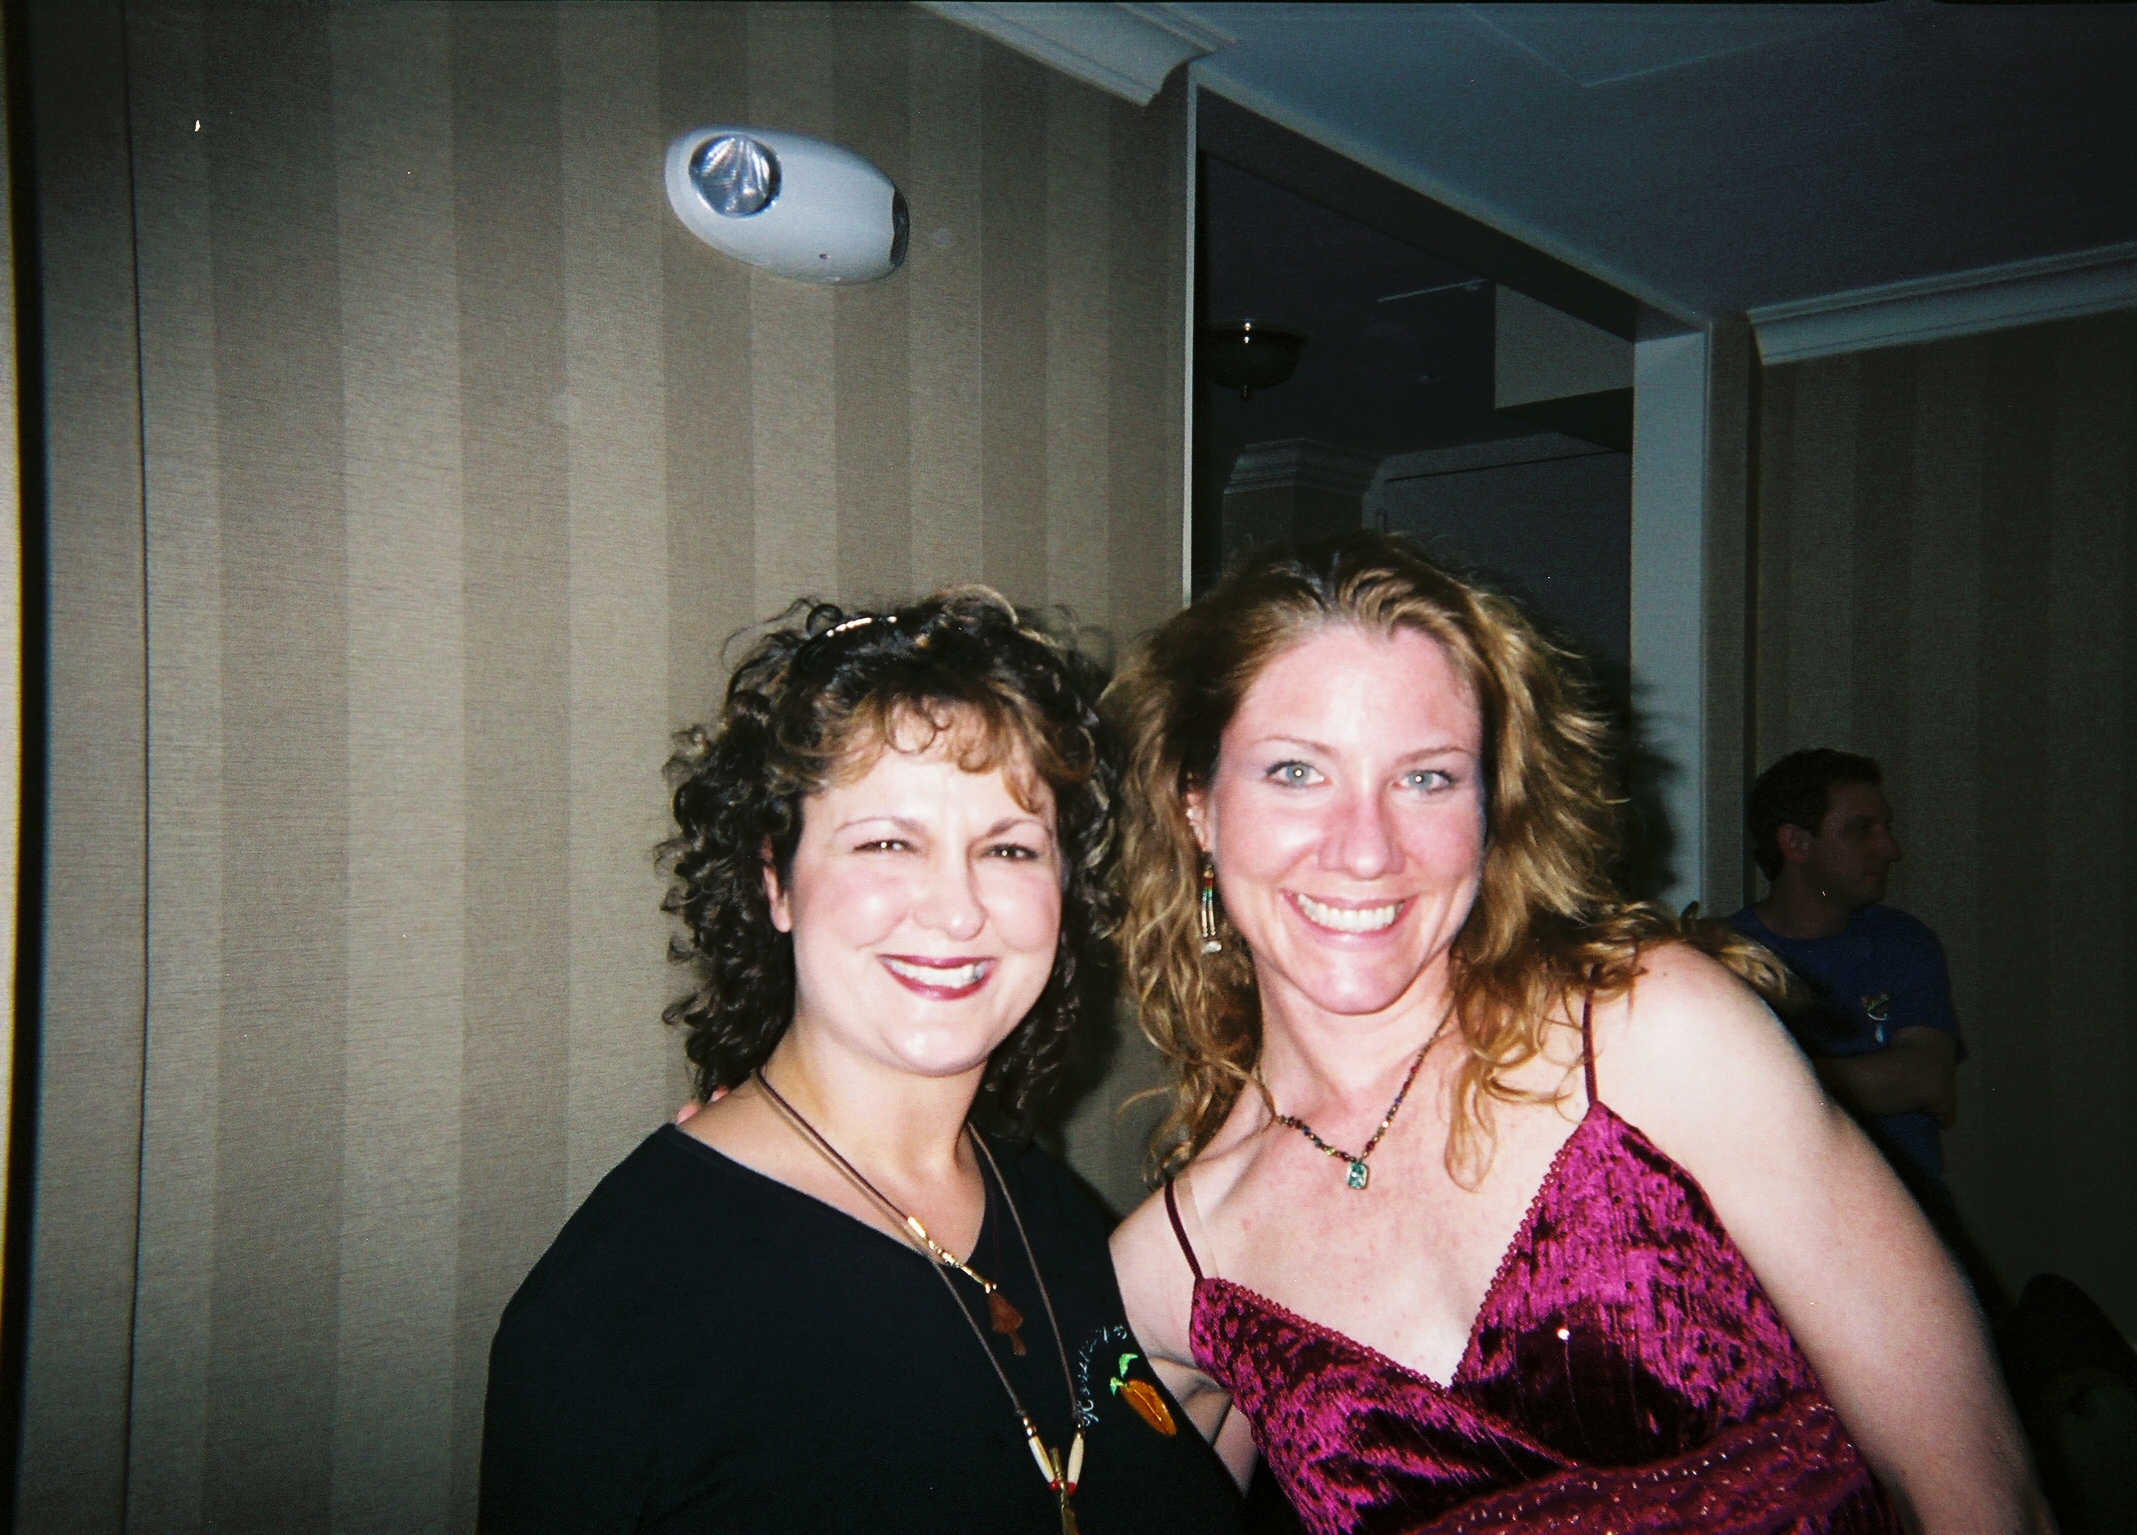 Jacquie and Schneille enjoying the HTN party, 3-11-06